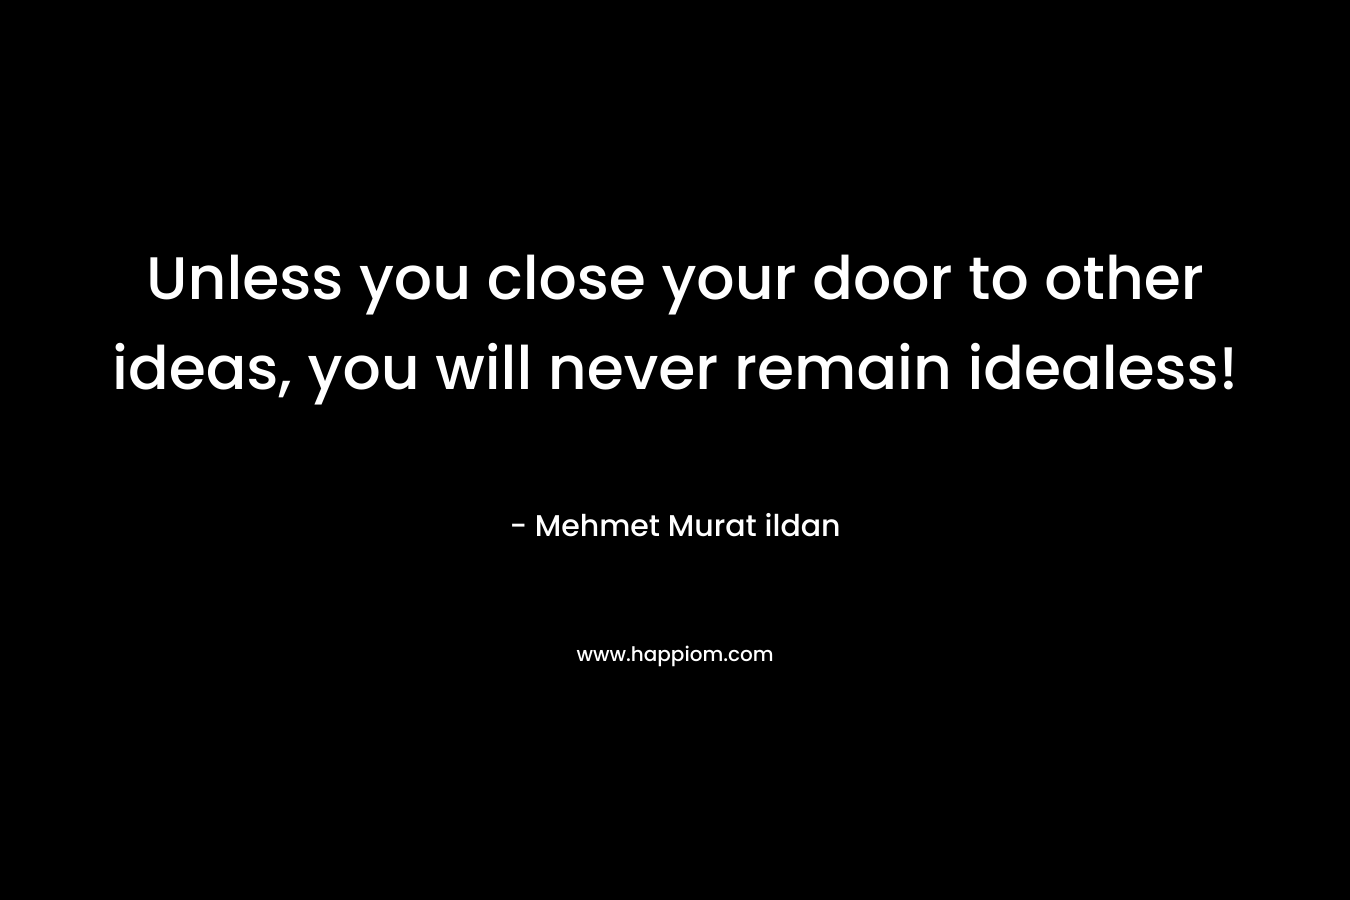 Unless you close your door to other ideas, you will never remain idealess!